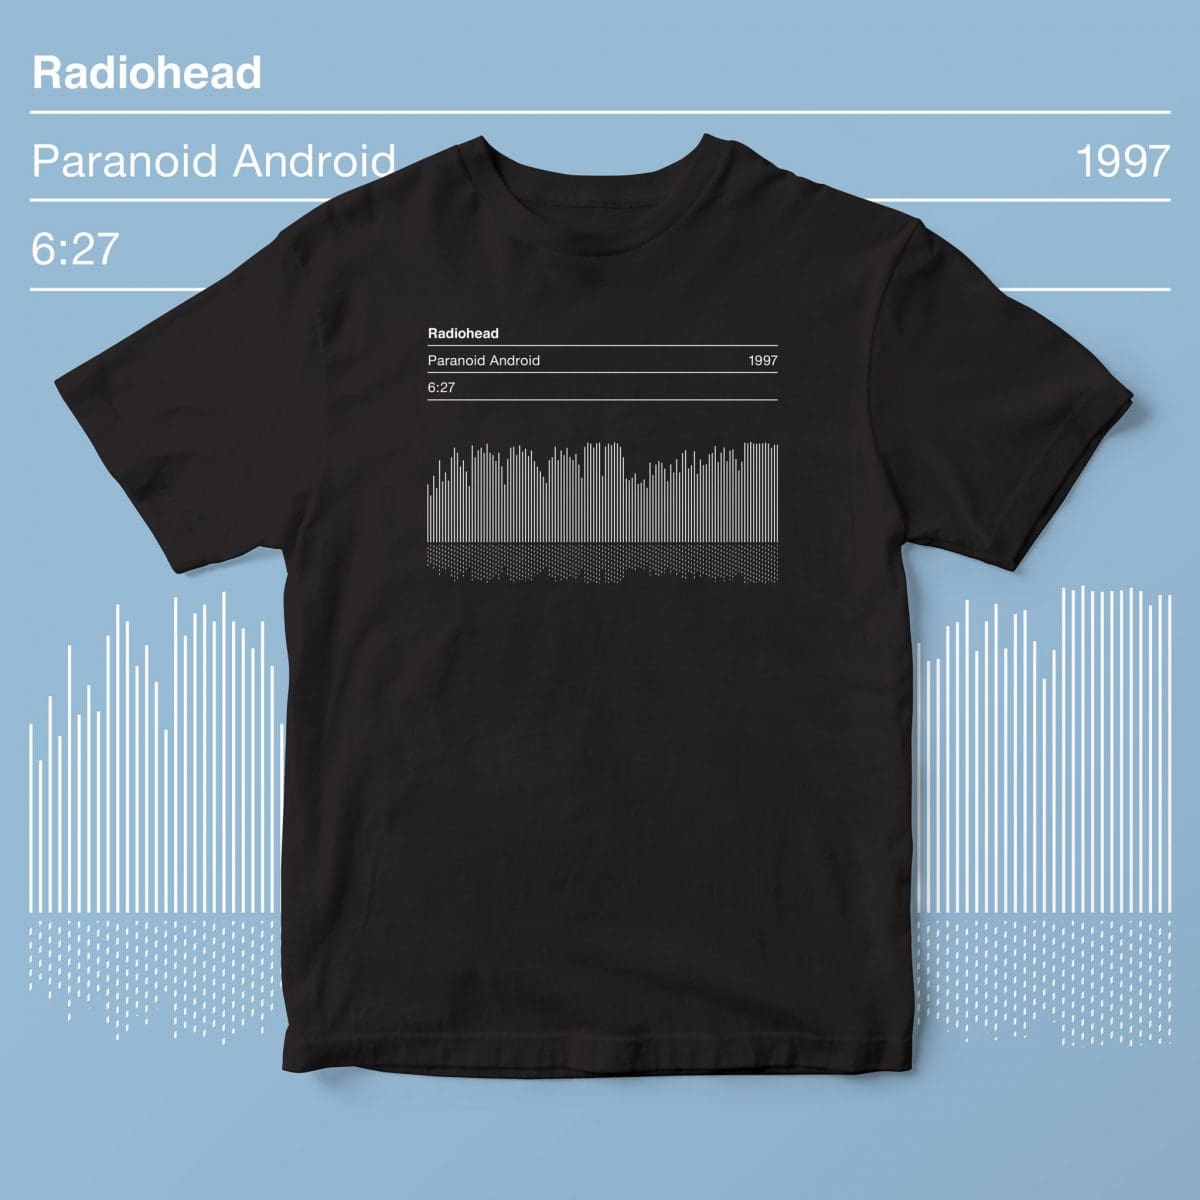 Sound wave t-shirts - various songs